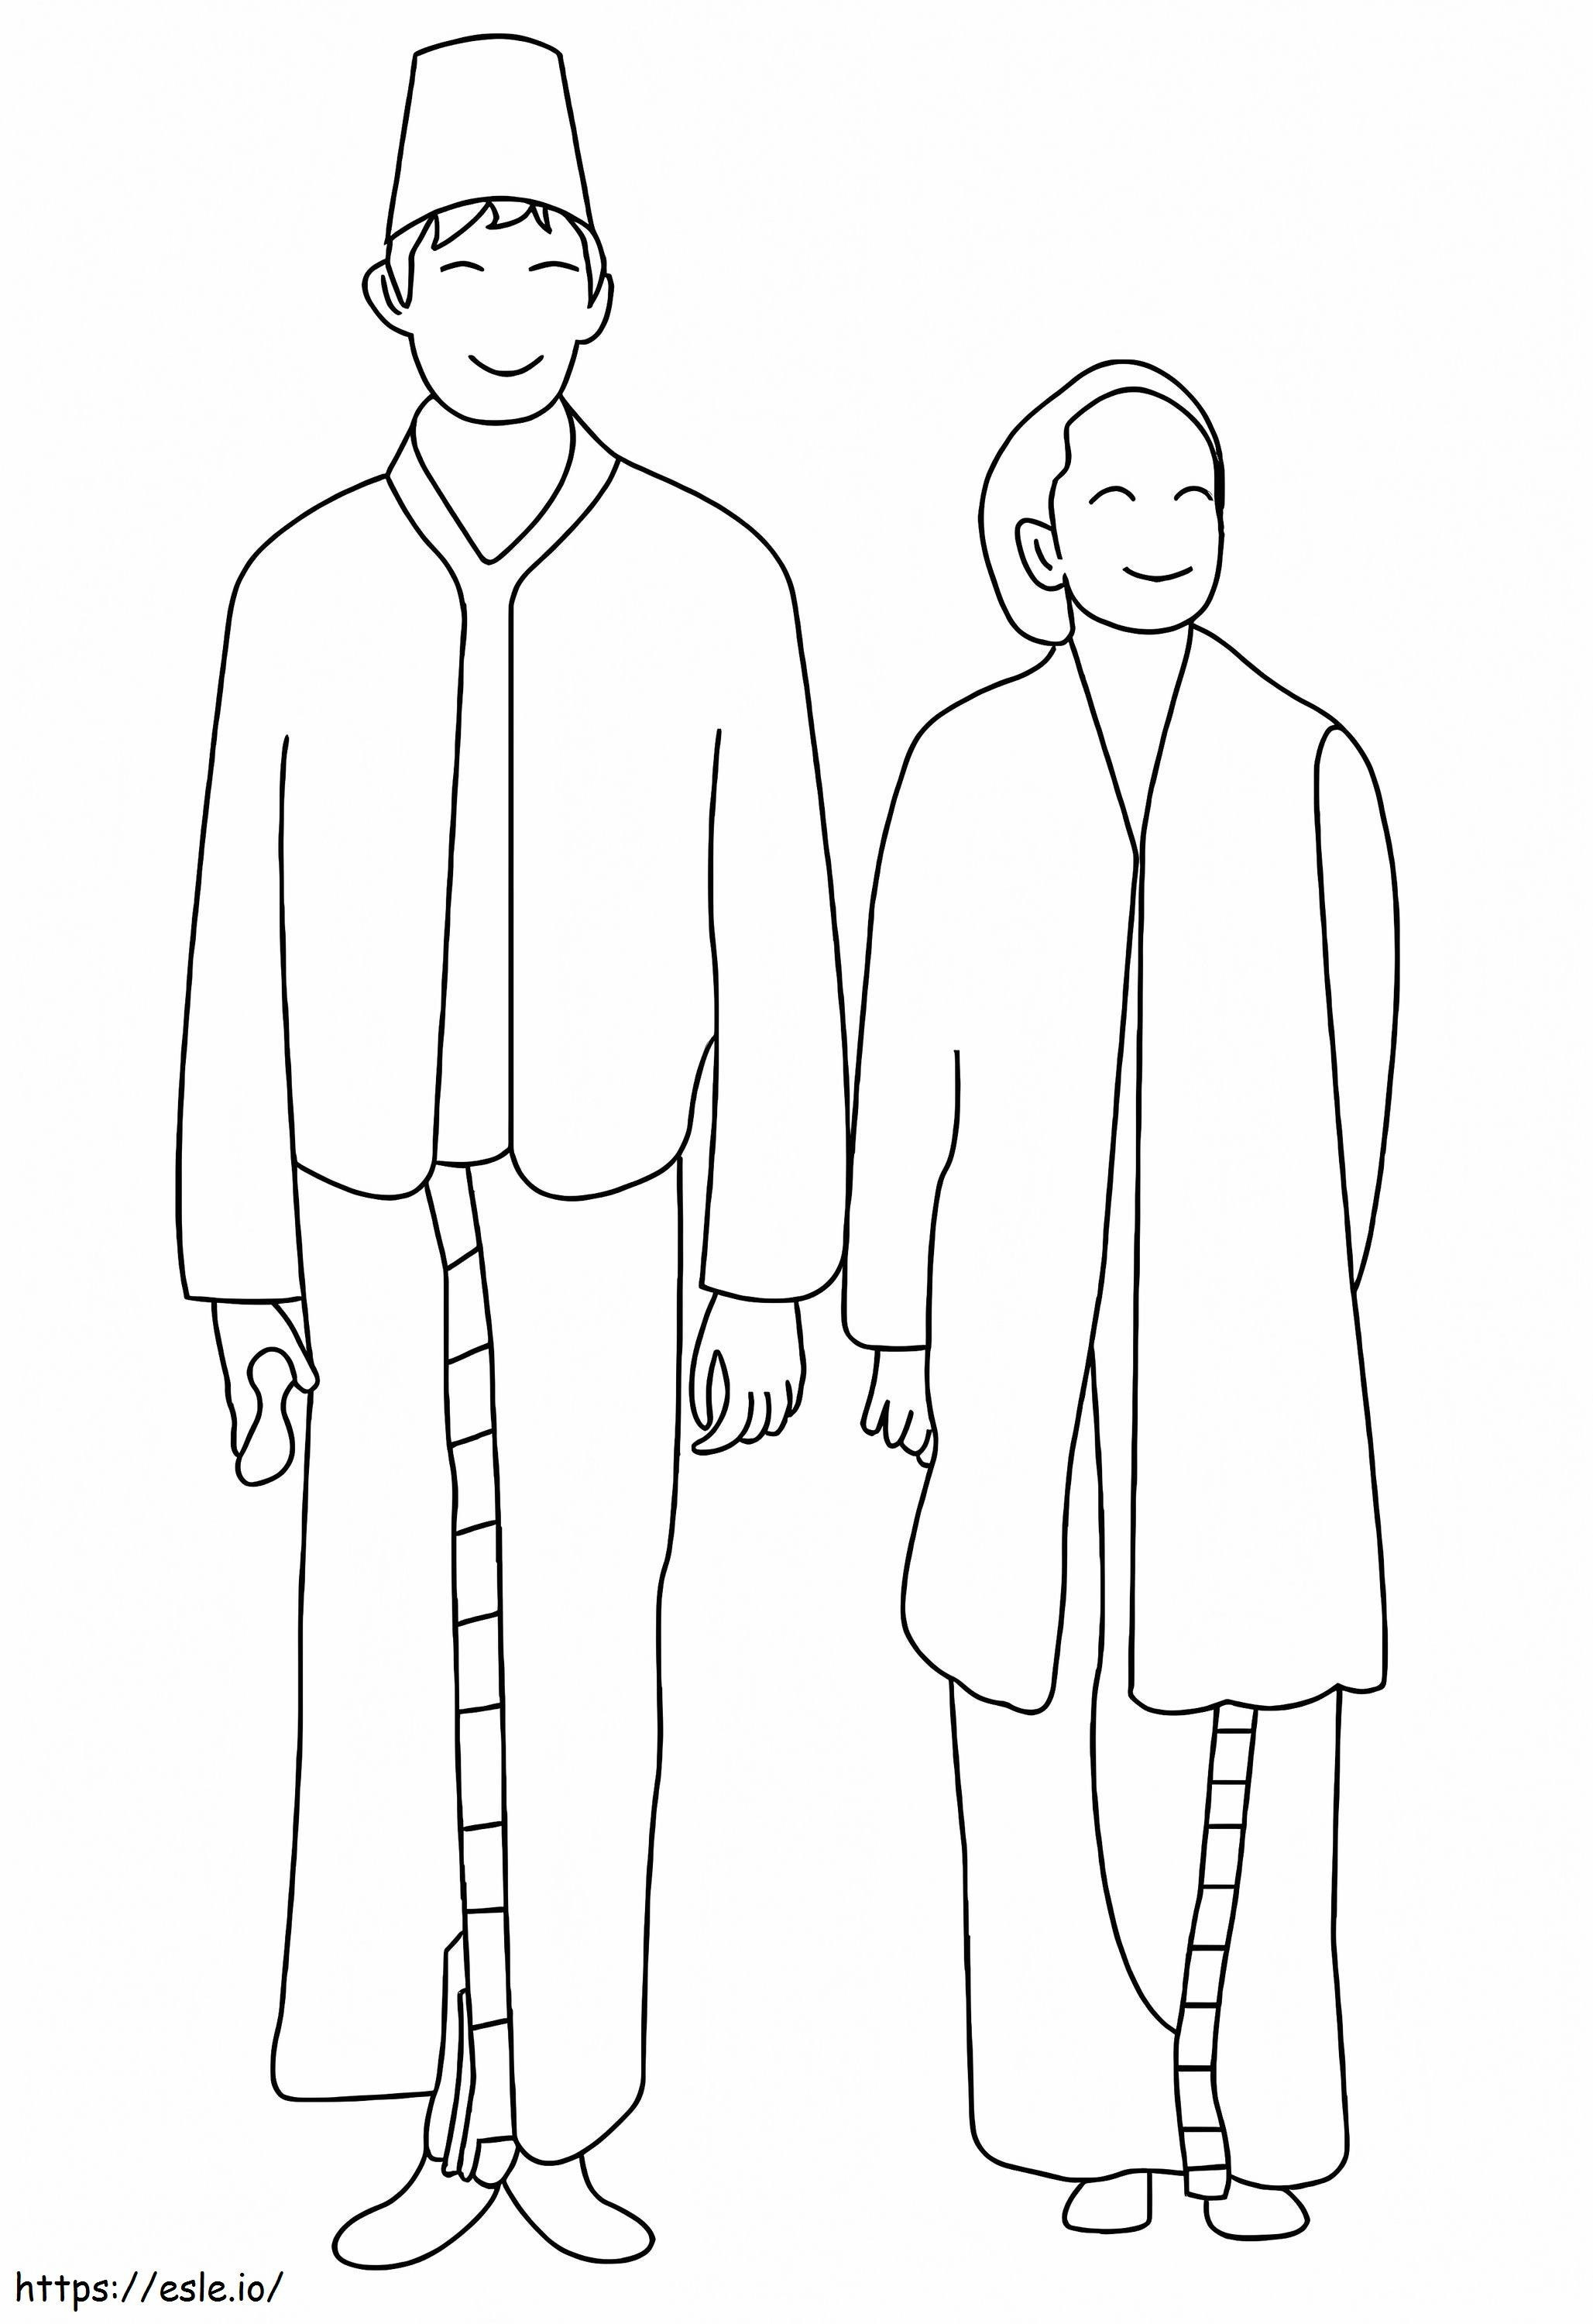 Indonesian Costume coloring page